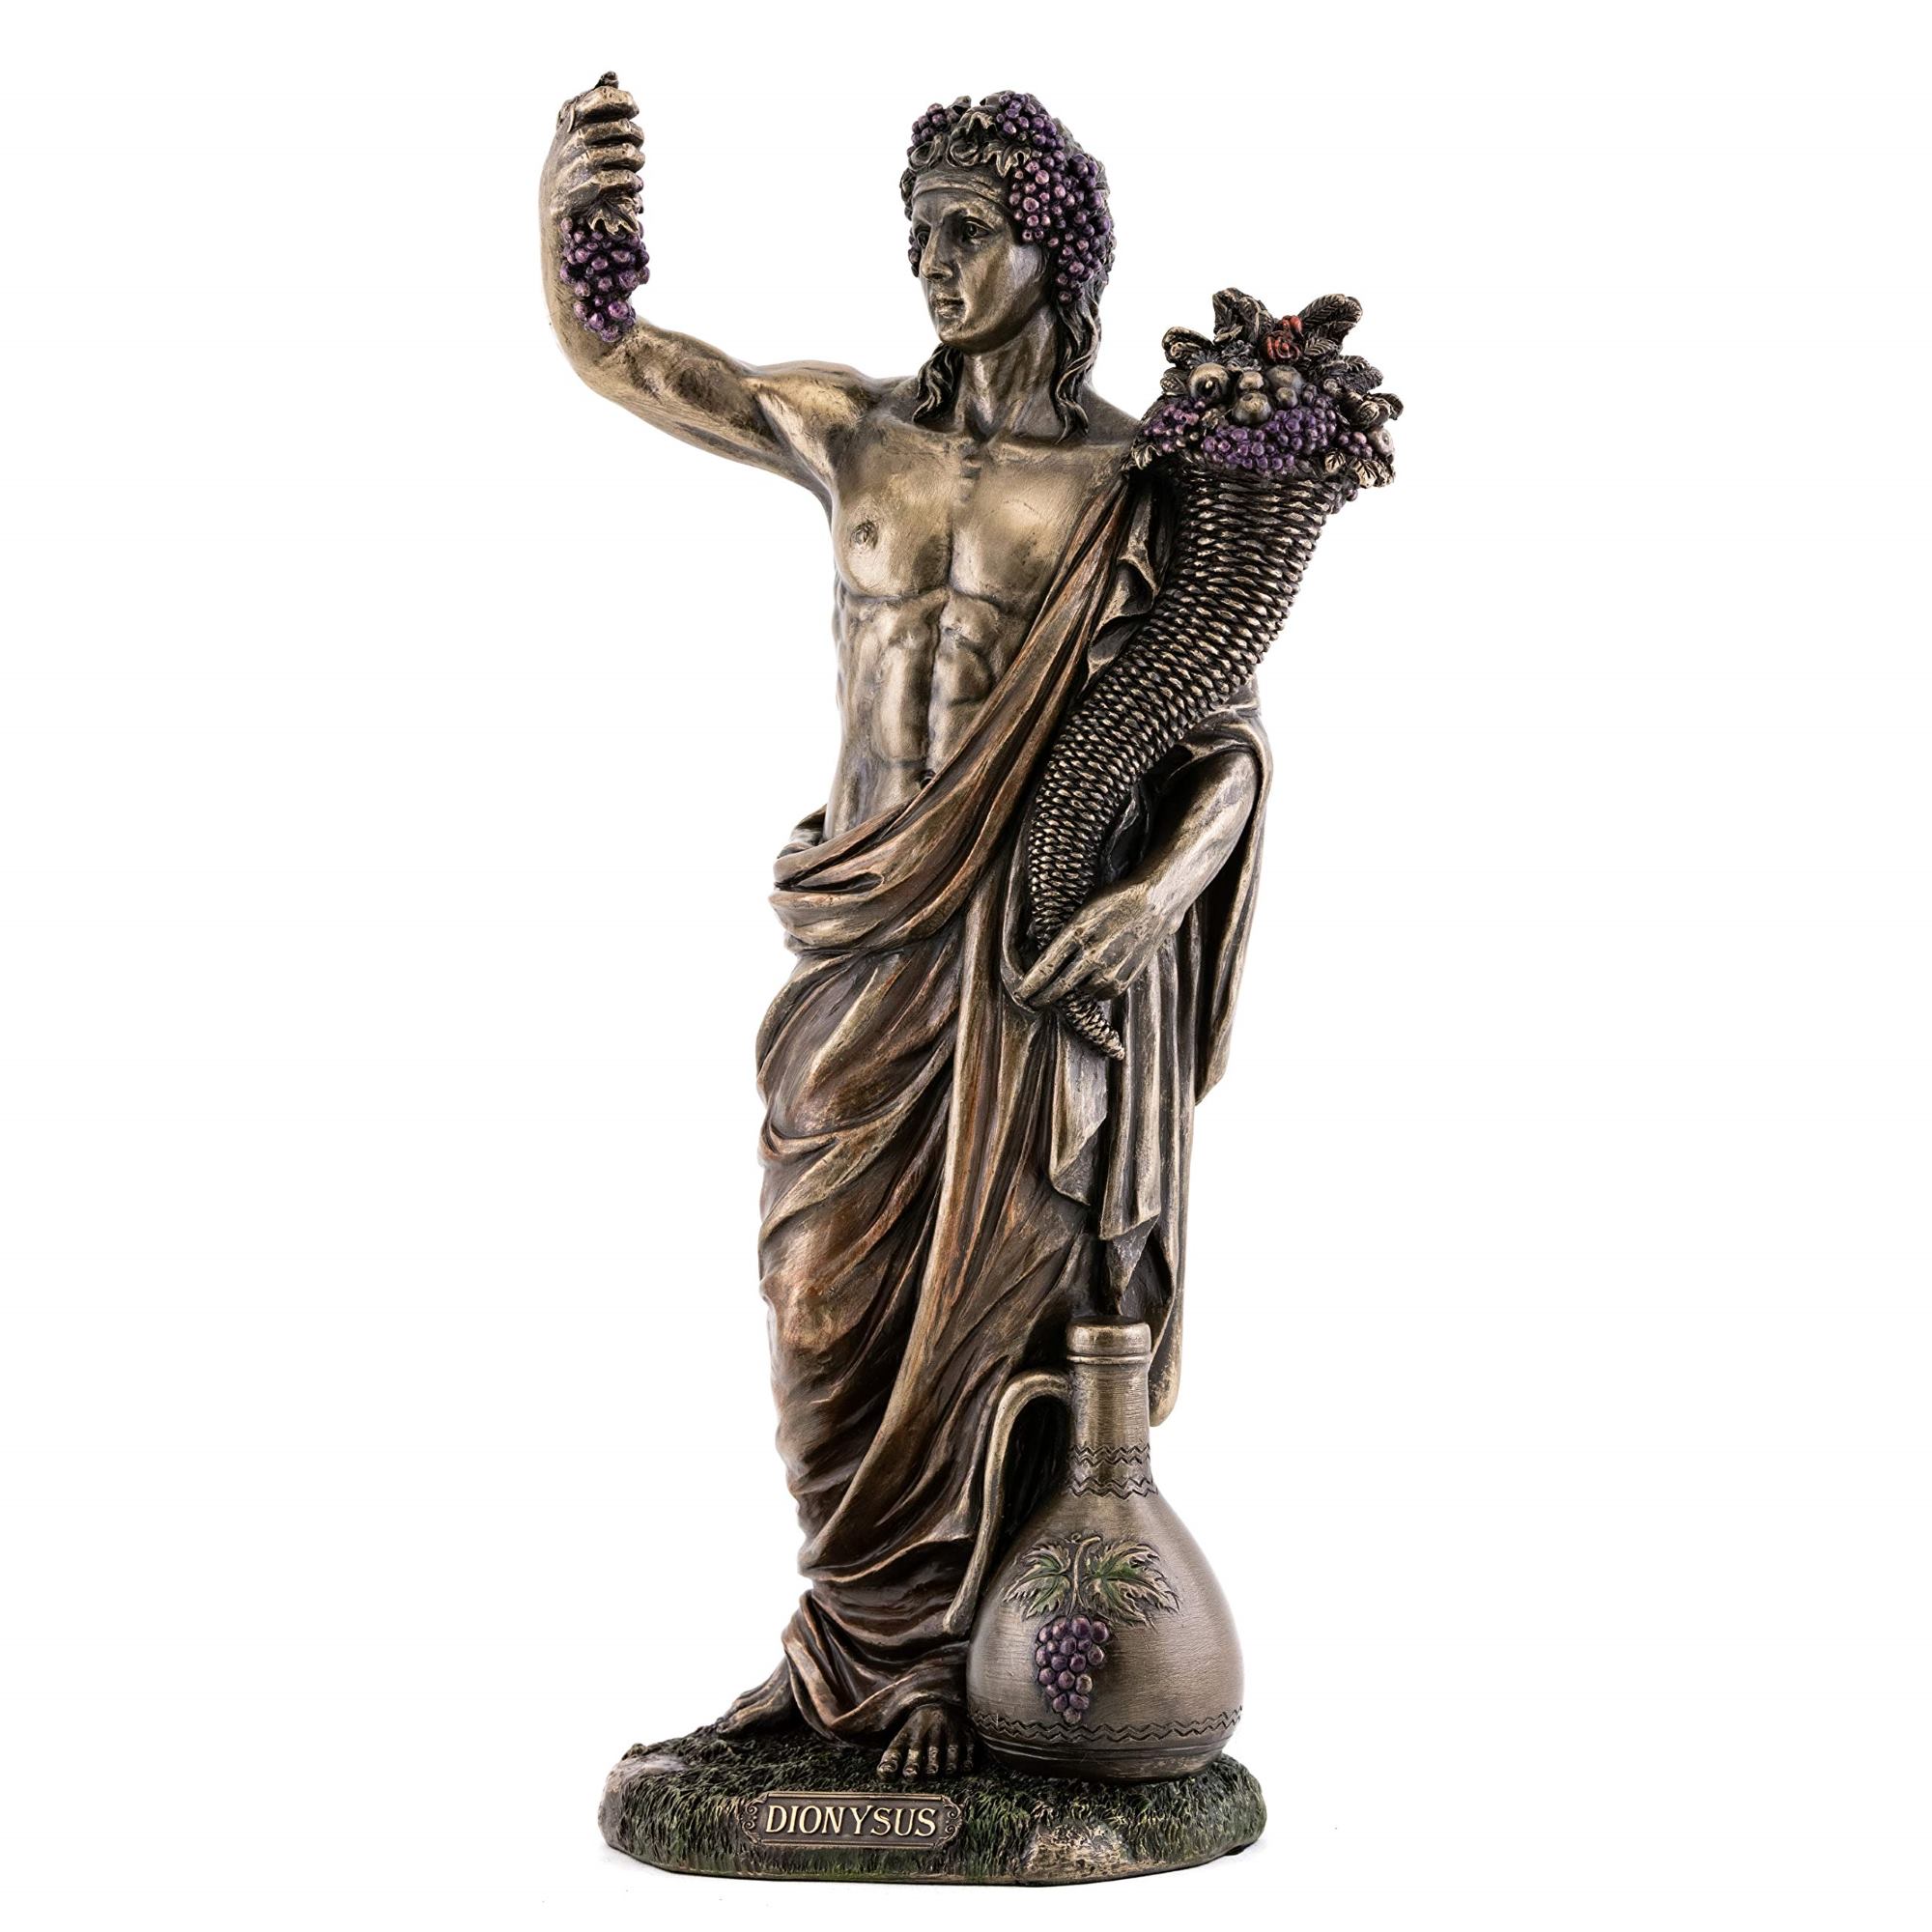 14-surprising-facts-about-the-dionysus-statue